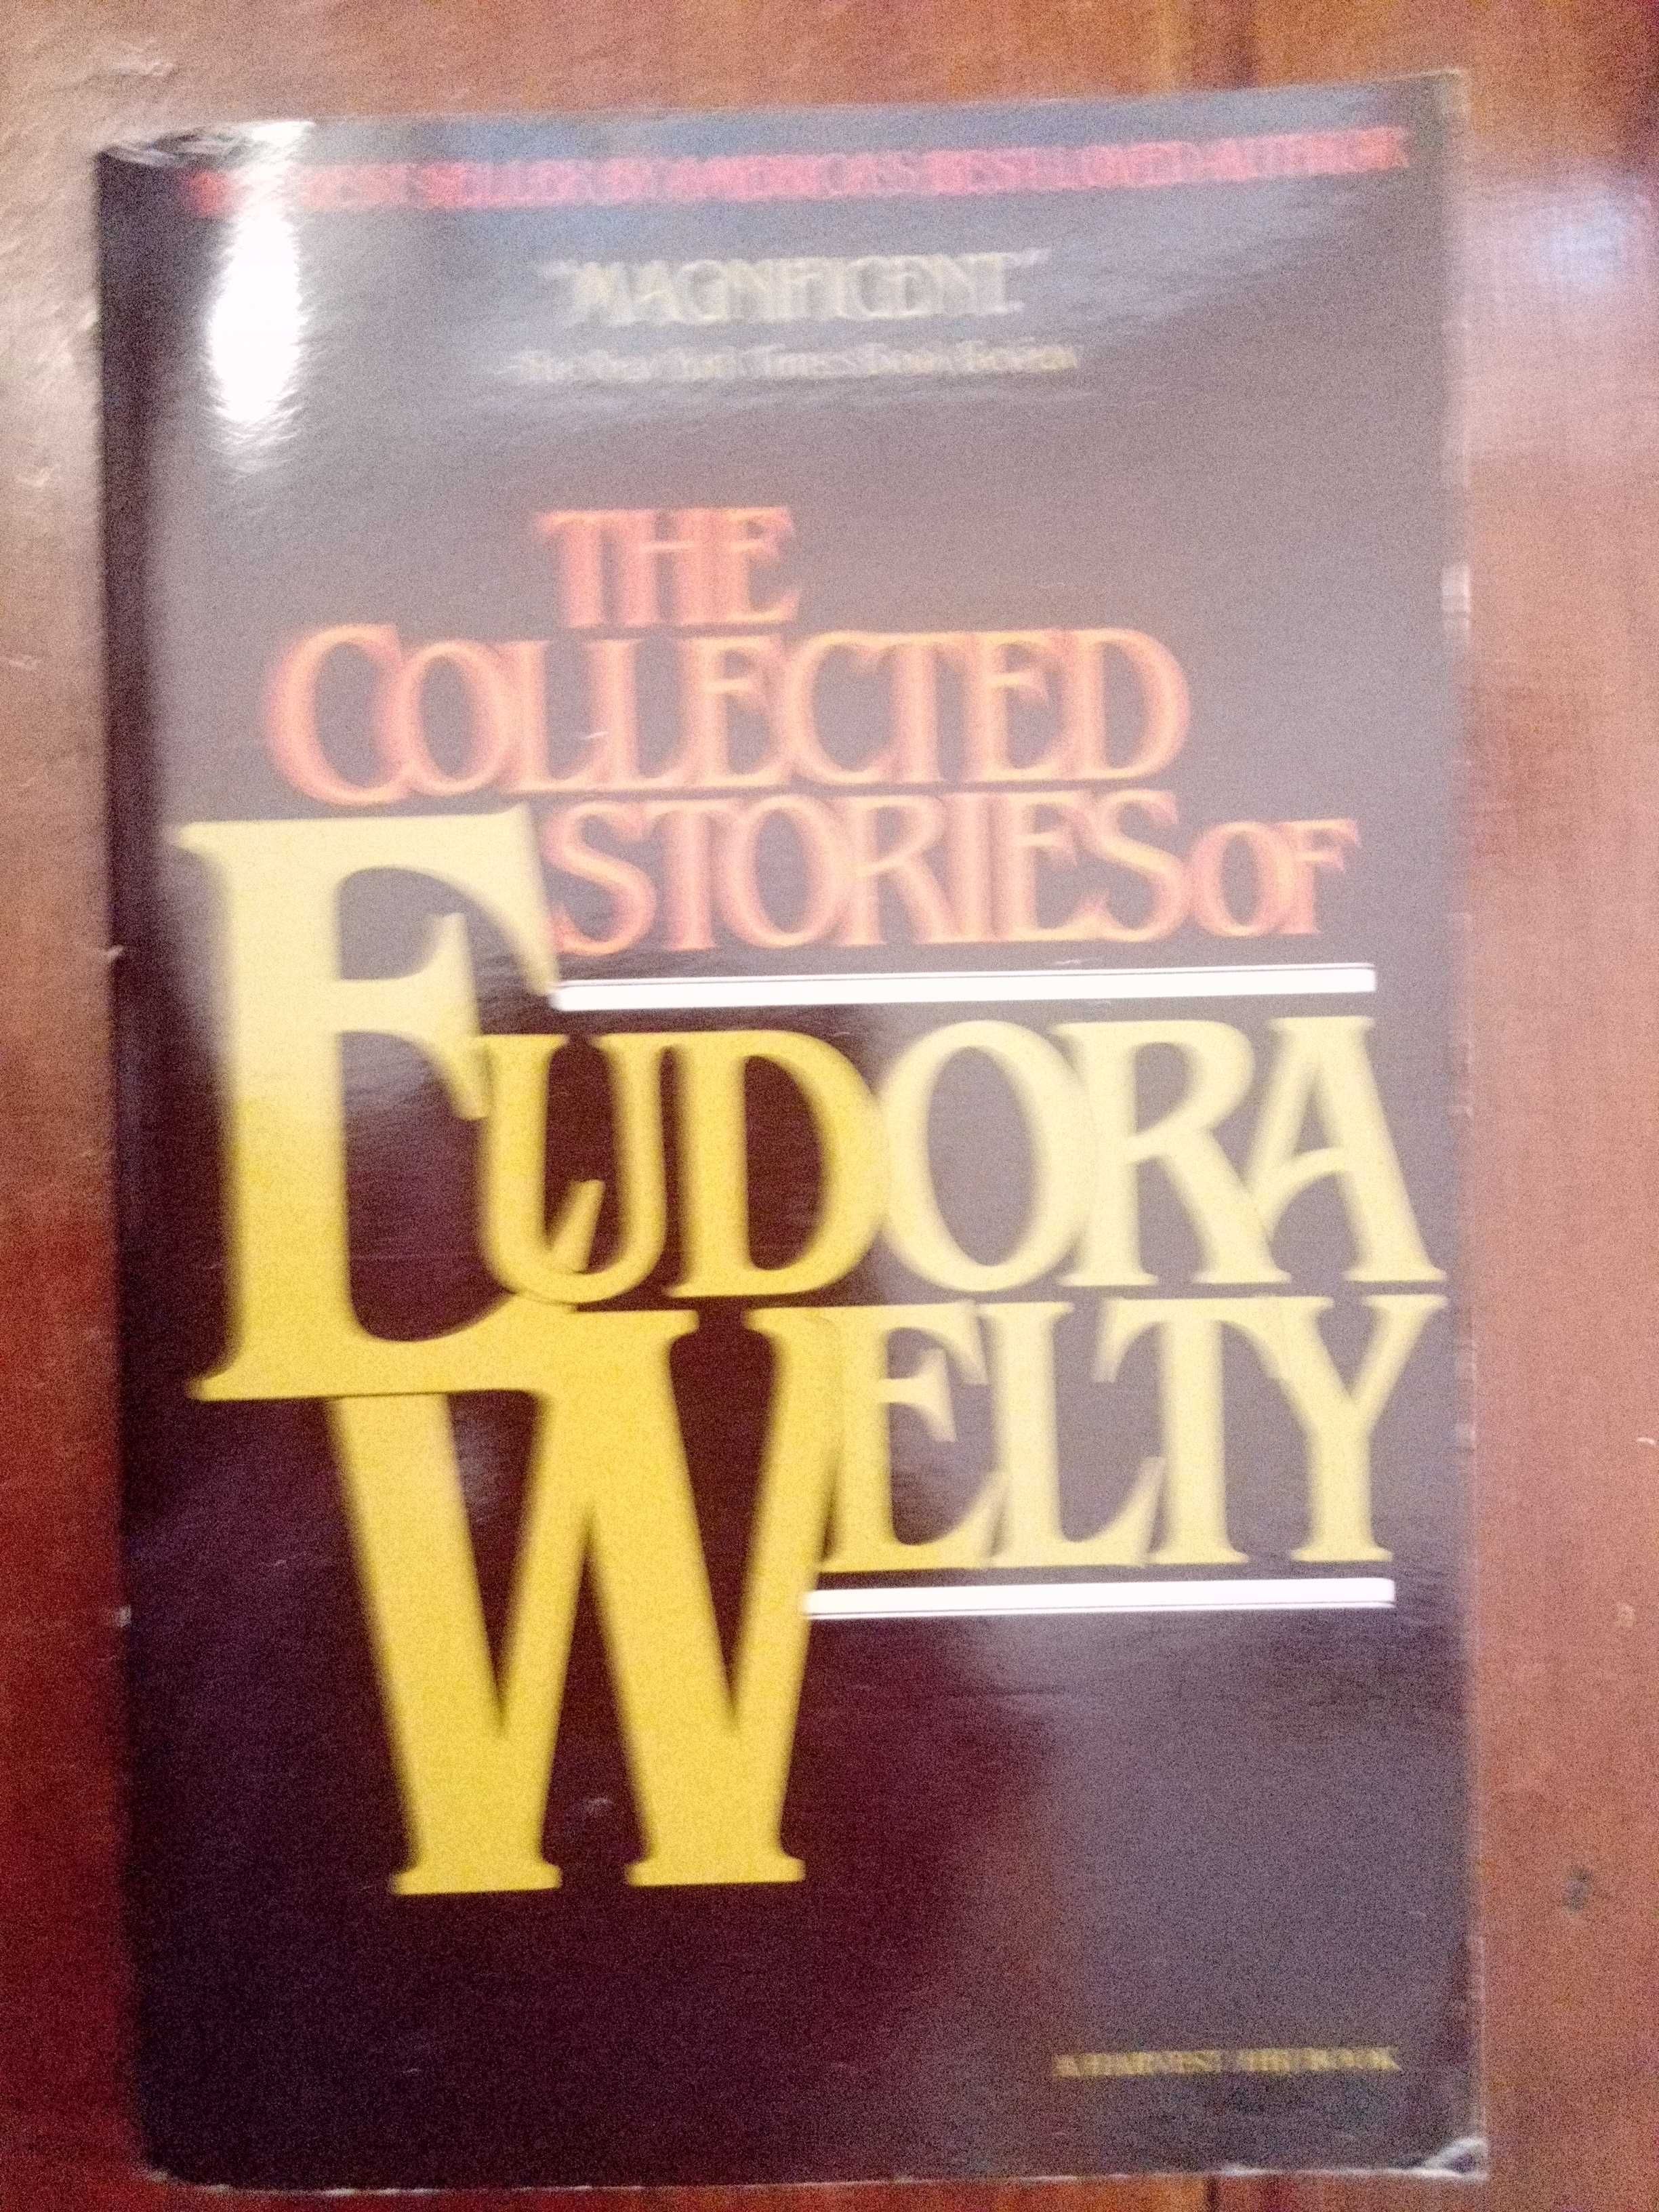 The collected stories of Eudora Welty